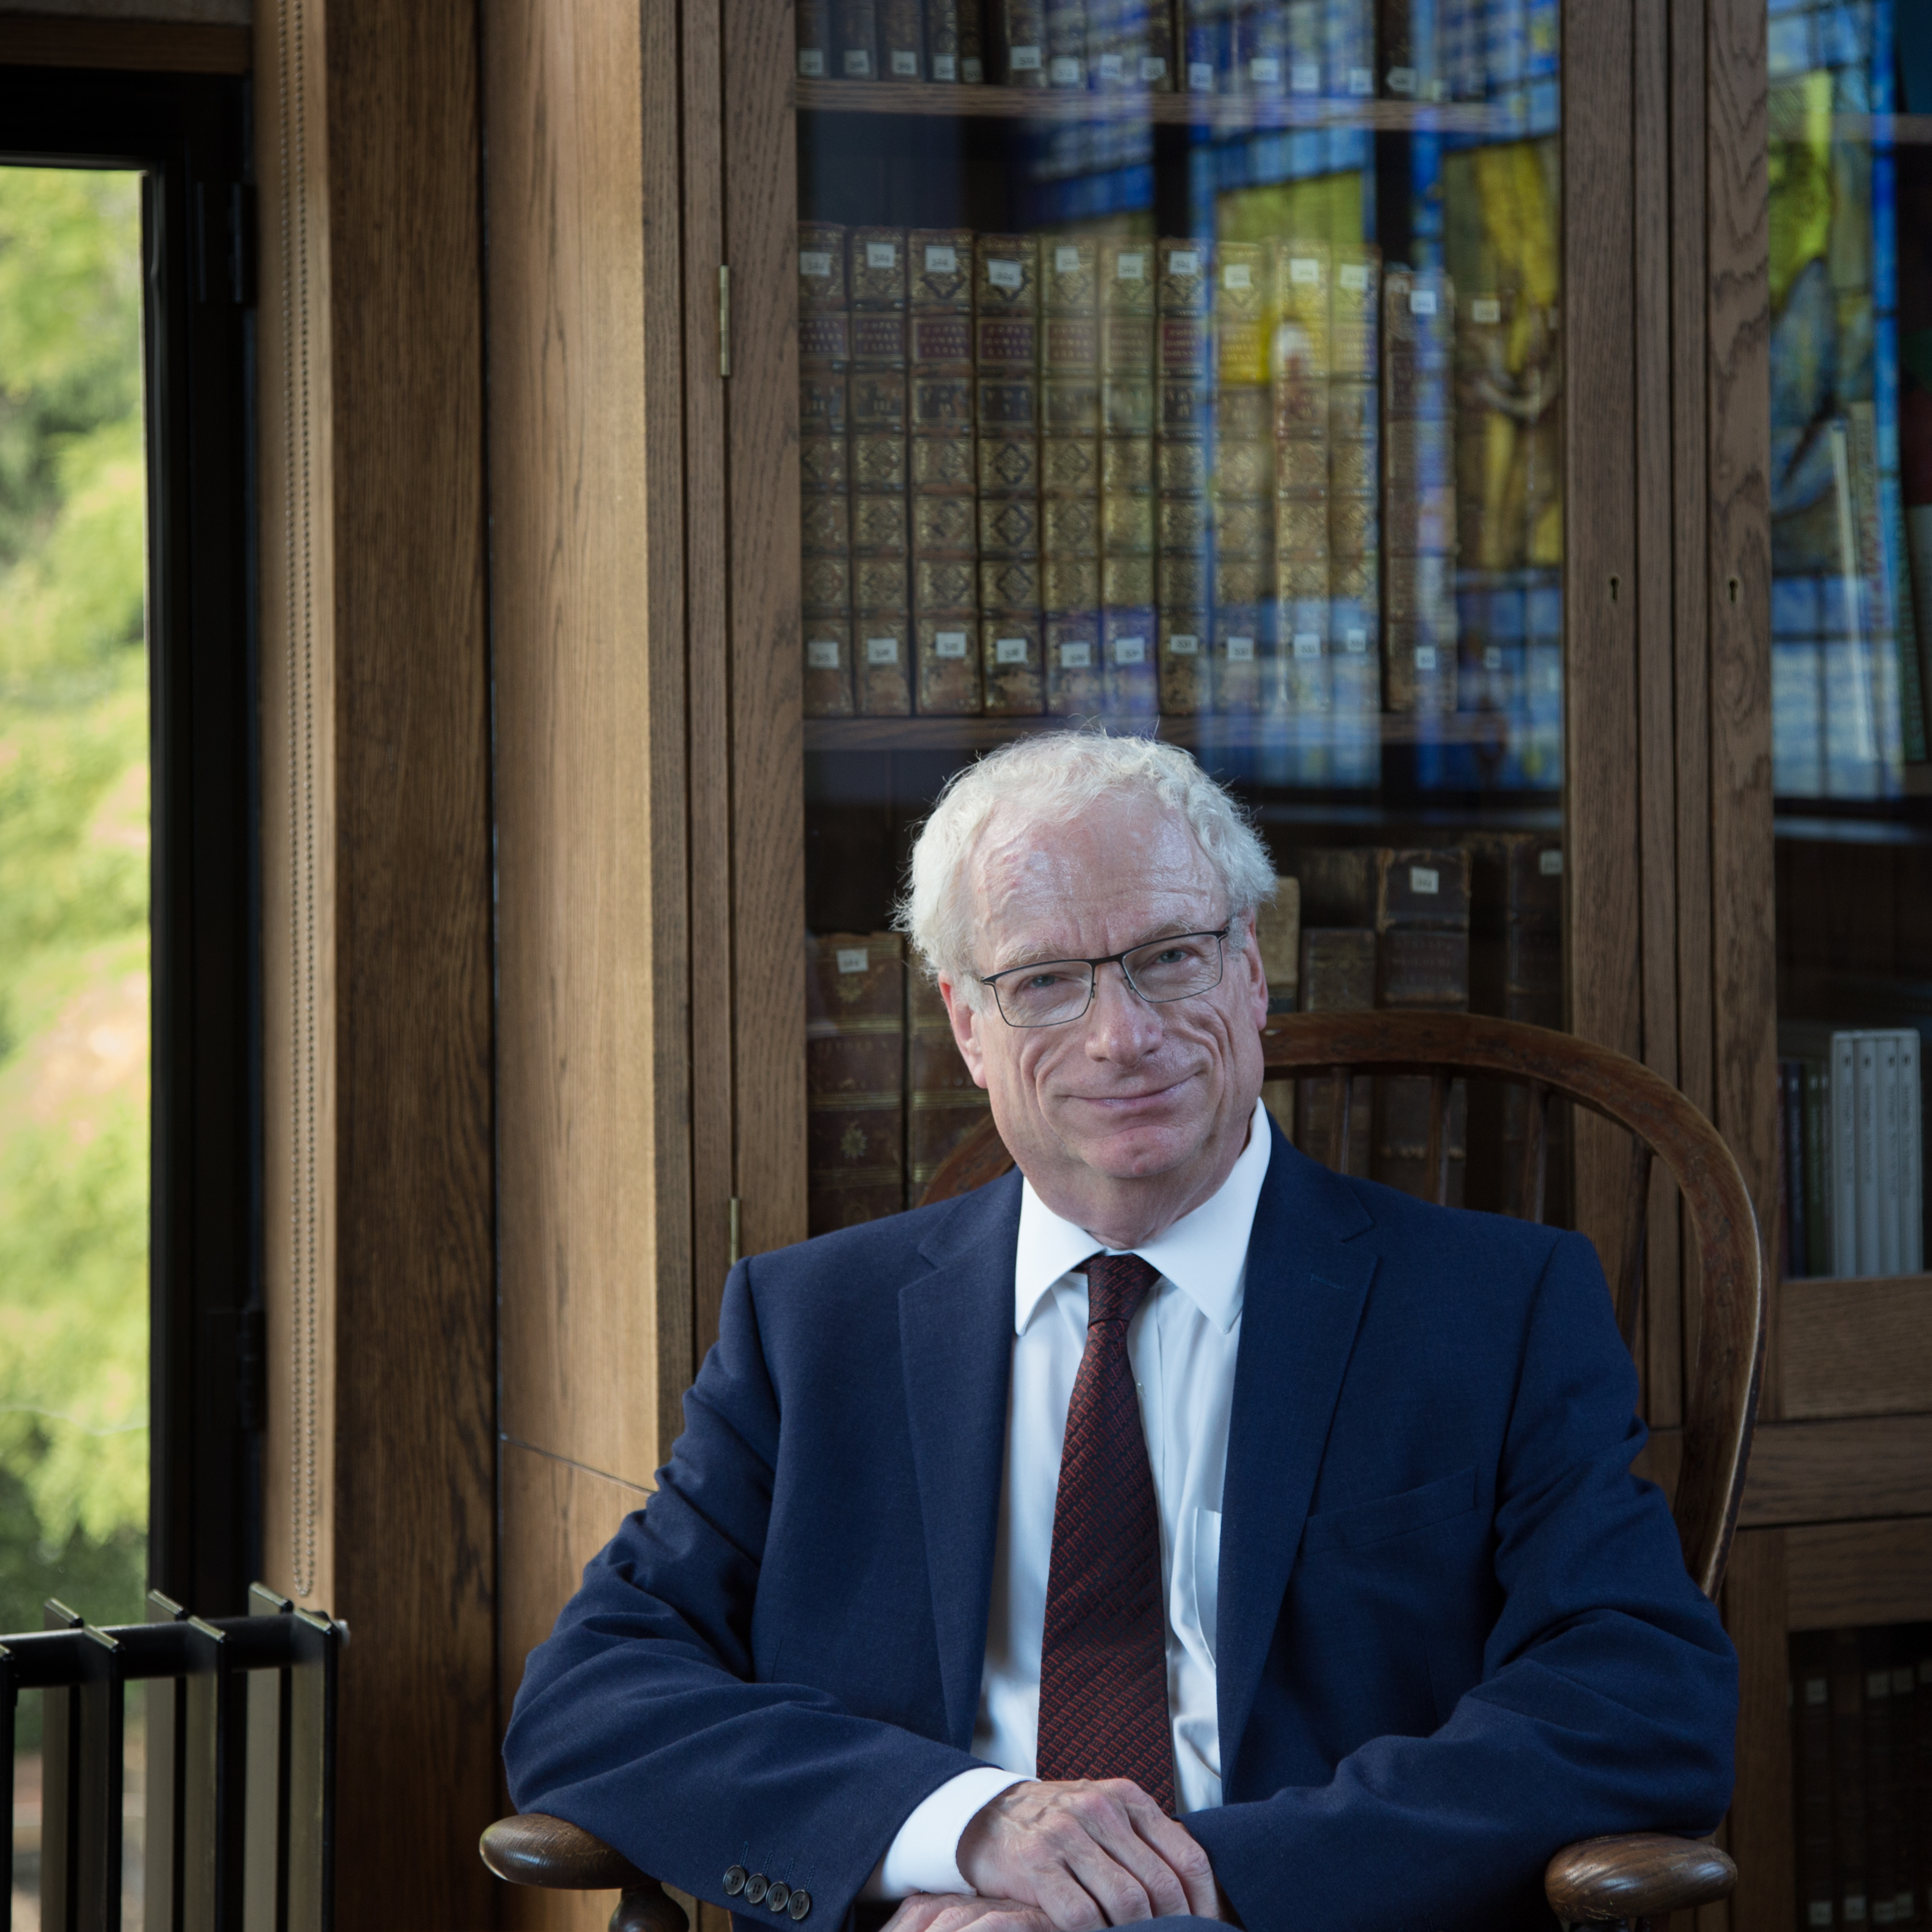 Photograph of Lord Chris Smith sitting in a chair in front of a bookcase. To the left of the photo is a window through which greenery can be seen .